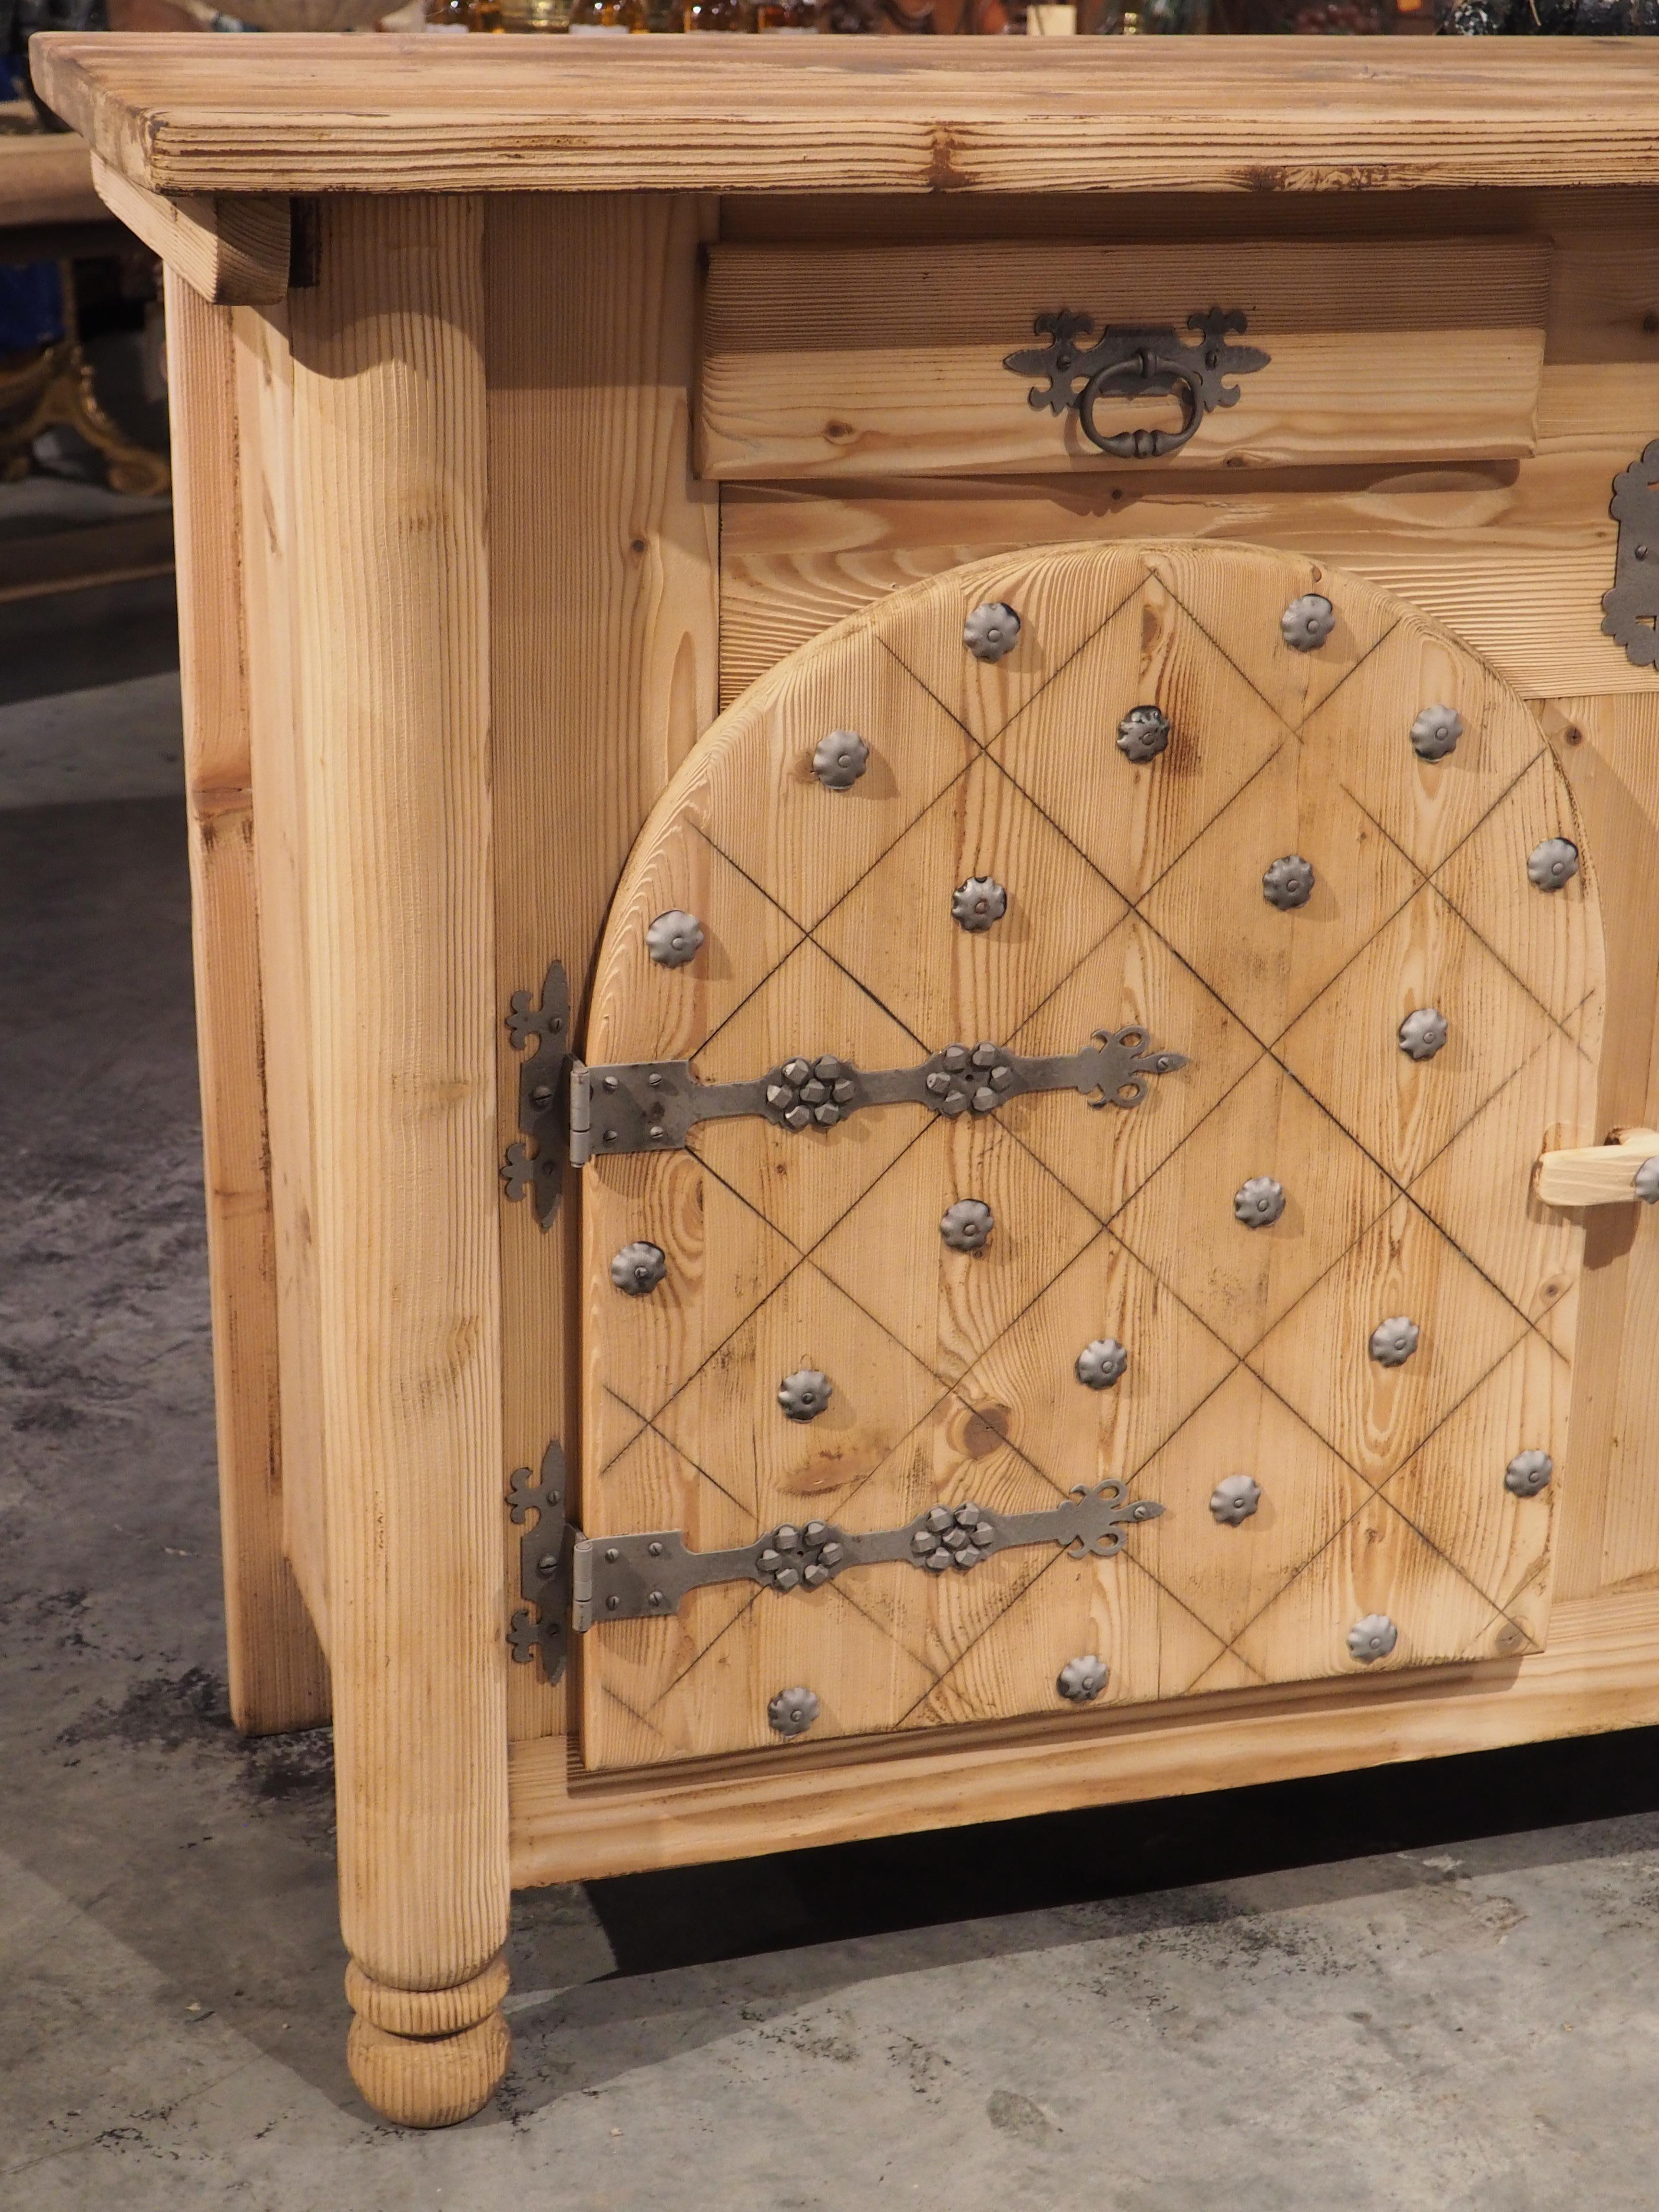 Bleached Stripped Pine Credenza from Spain with Arched Doors and Decorative Nailheads